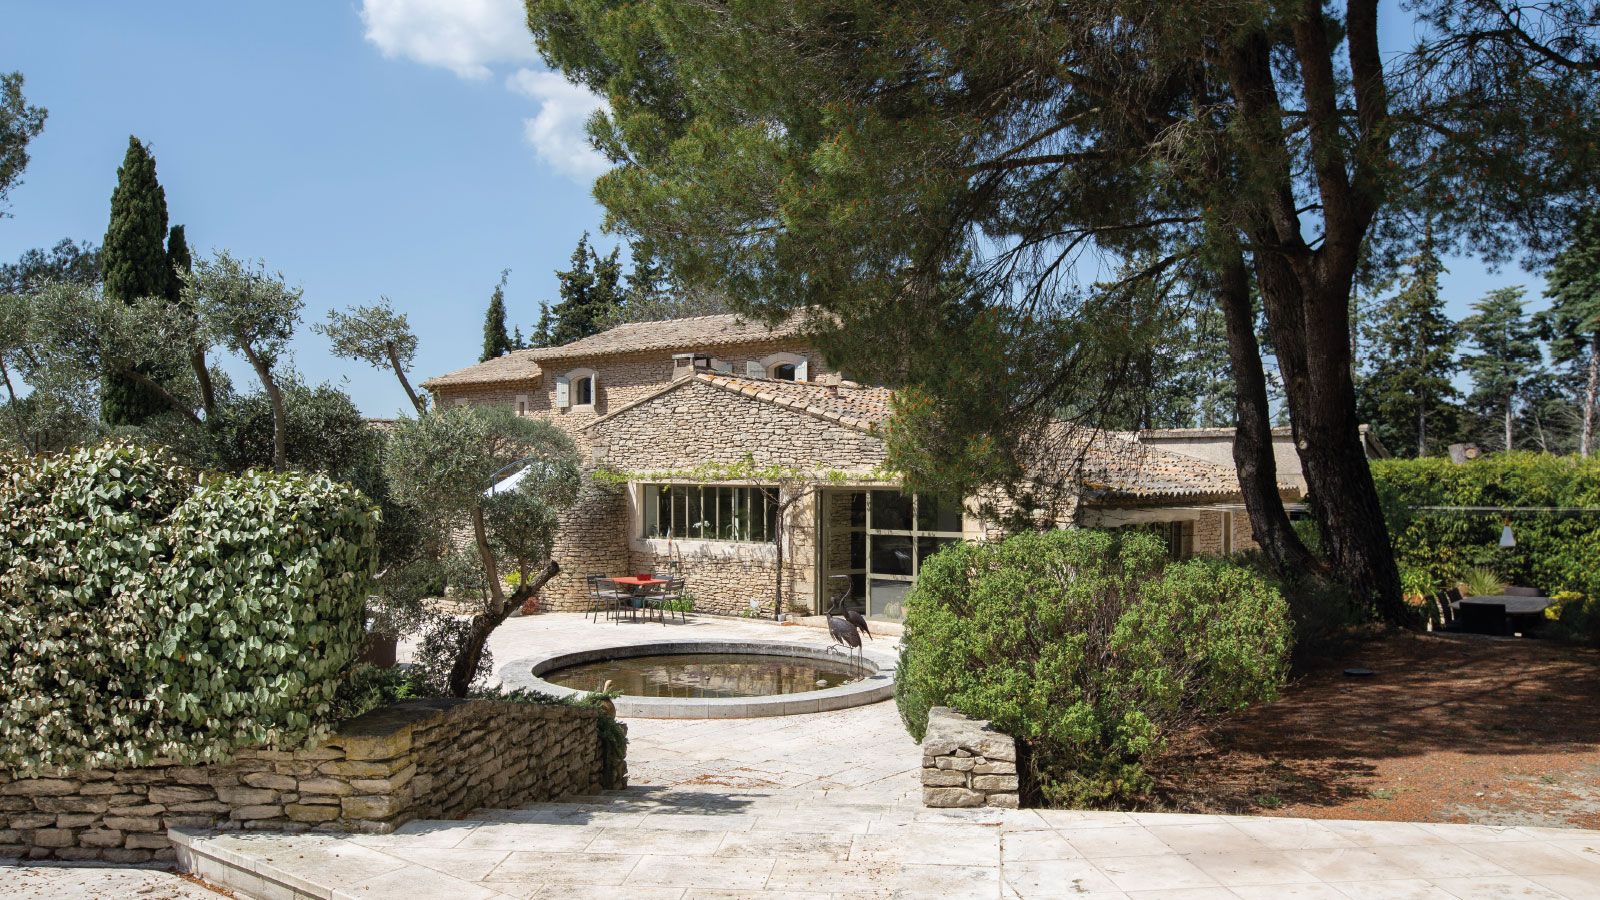 Luxury Vacation Rentals and Villas in South of France